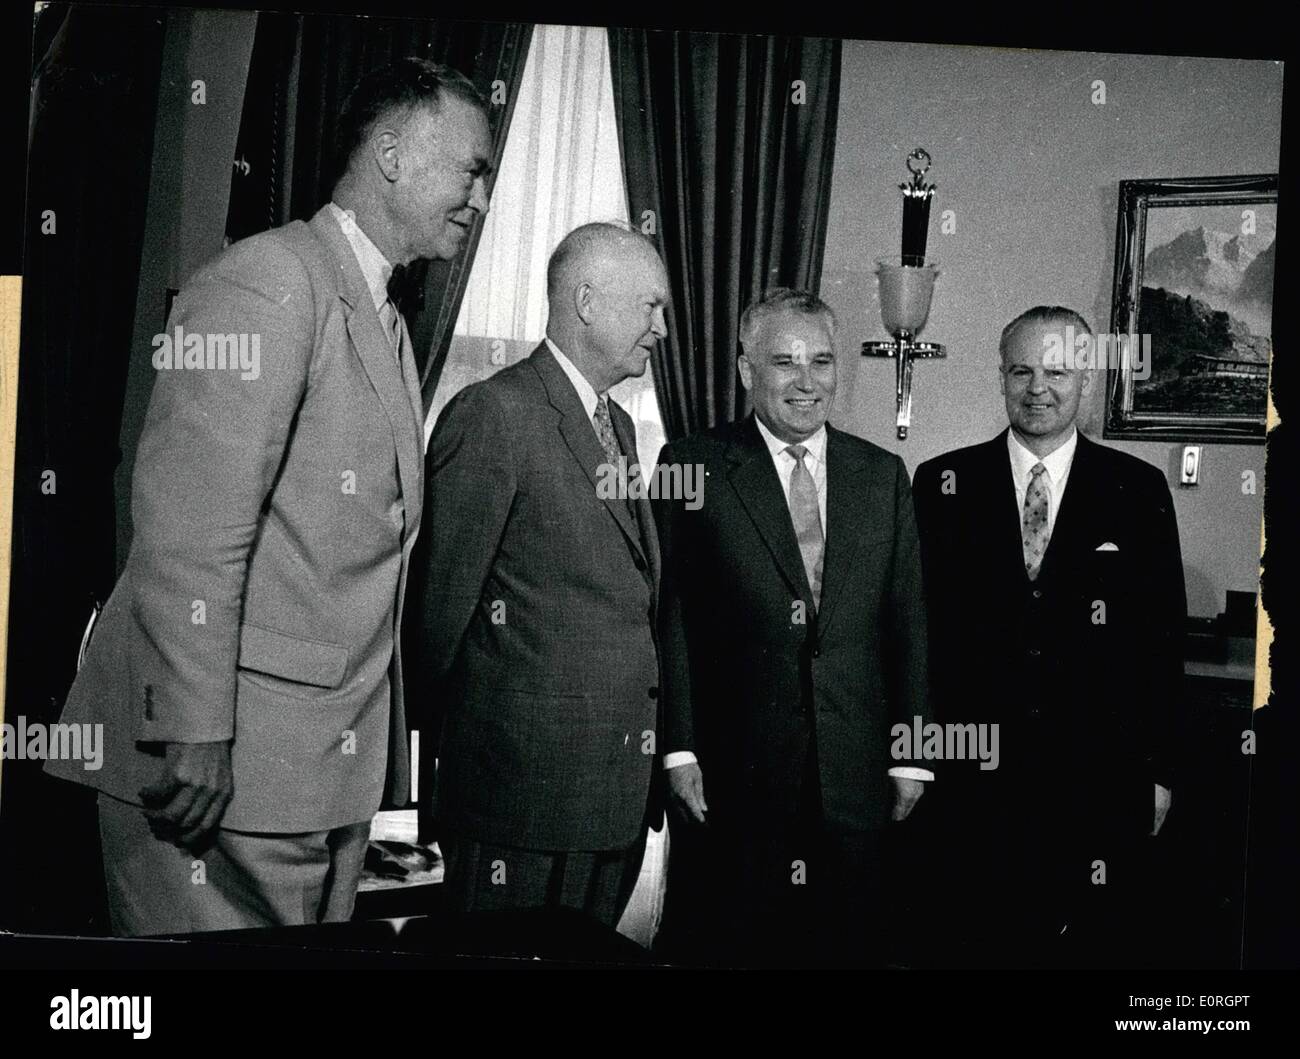 Jul. 07, 1959 - Koslow with Eisenhower: The vice-Prime Minister of the Soviet Union, Koslow, who on June 29th, 1959 opened a Soviet Exhibition in New York which is to show to the Americans something about science, art, technique and every-day life in the Soviet Union, on July 1st, 1959 had a talk with President Eisenhower in the White House in Washington about the Berlin problem which in America raised some pessimism in view of the re-opening of the Conference in Geneva Stock Photo